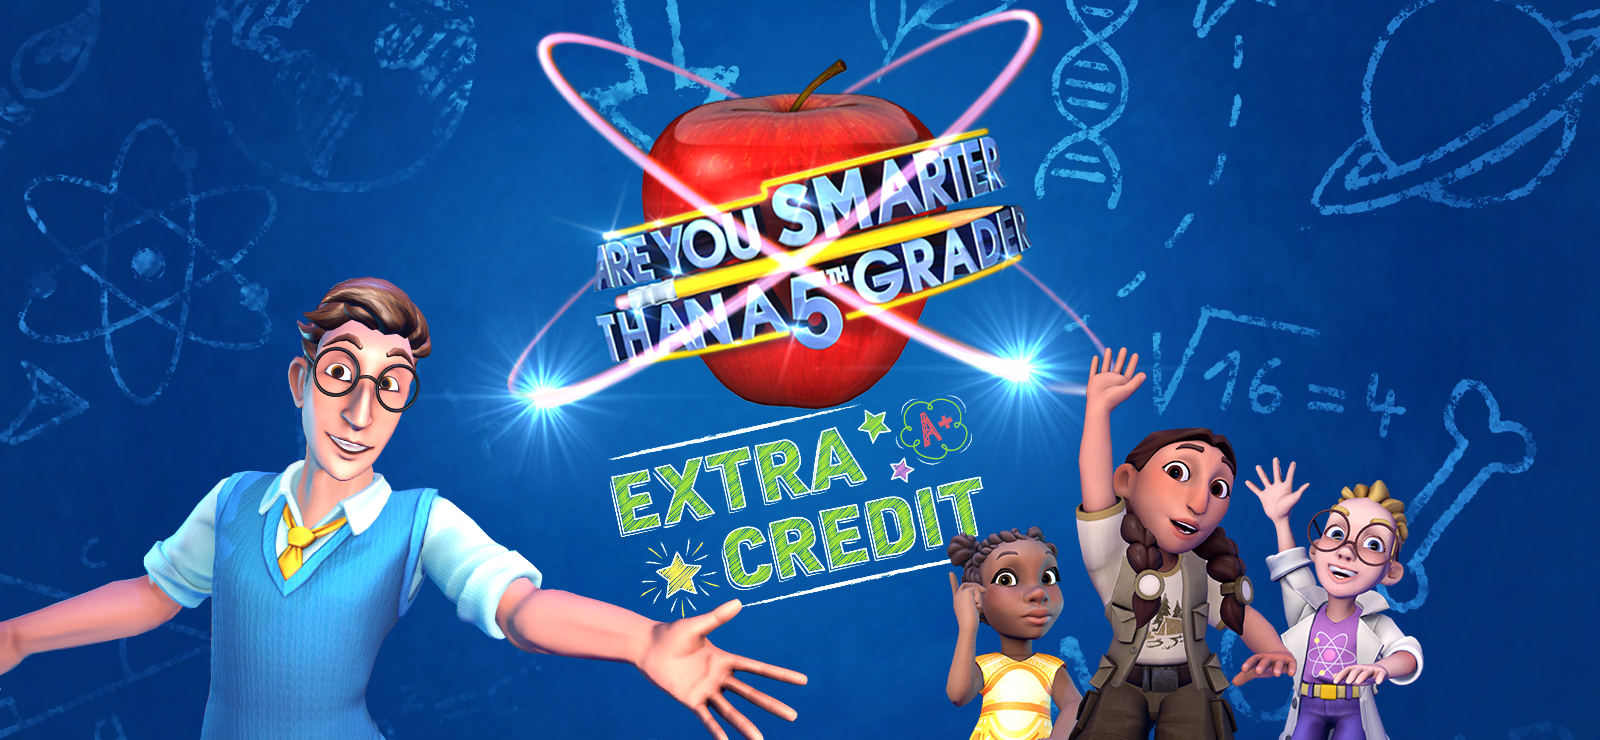 Are You Smarter Than A 5th Grader? - Extra Credit